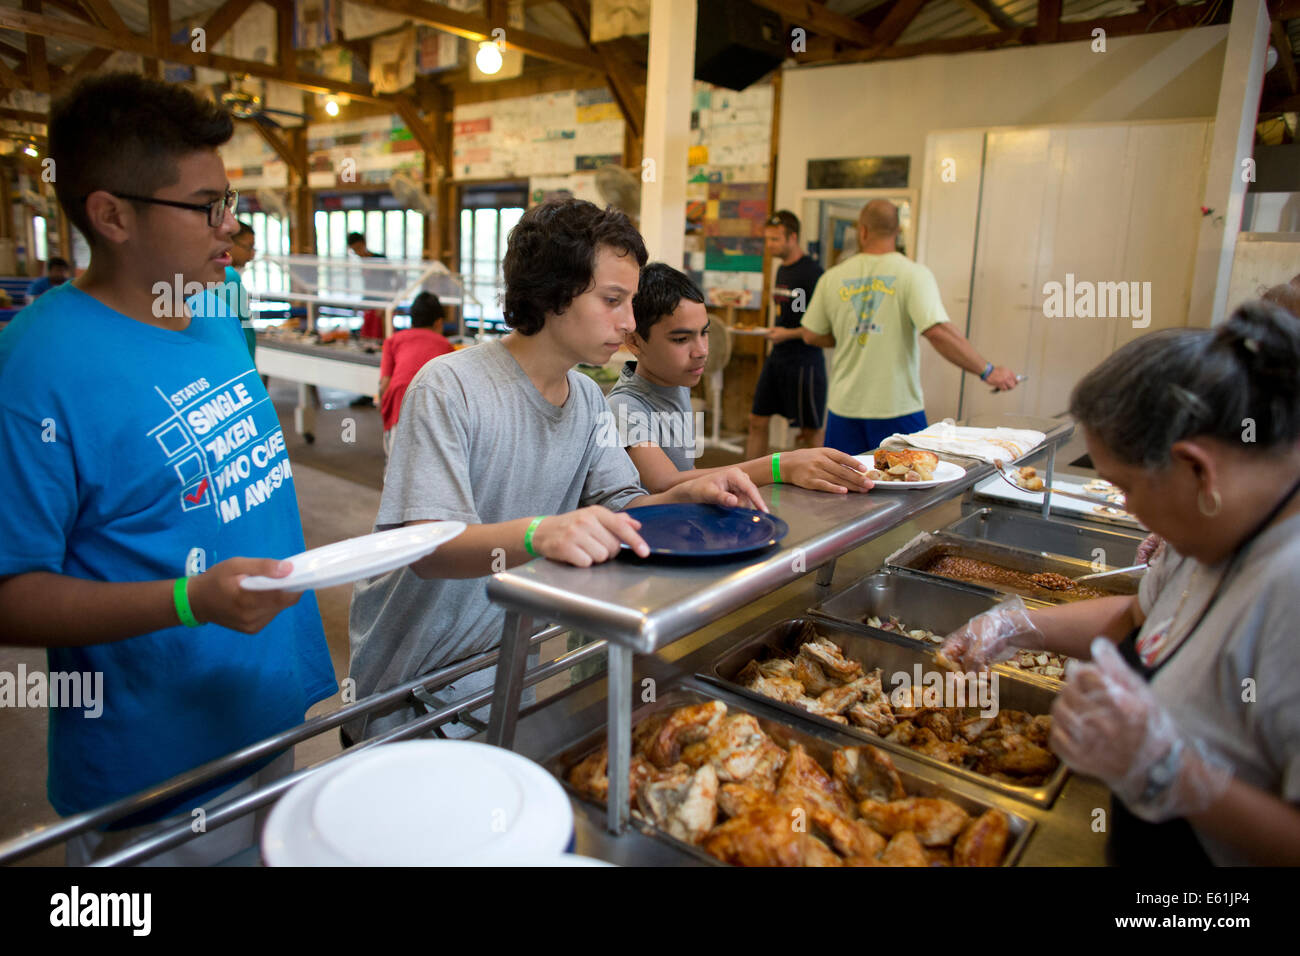 Male campers go through food line during lunch at Camp Champions, a sleep-over summer camp on Lake LBJ in Central TX Stock Photo